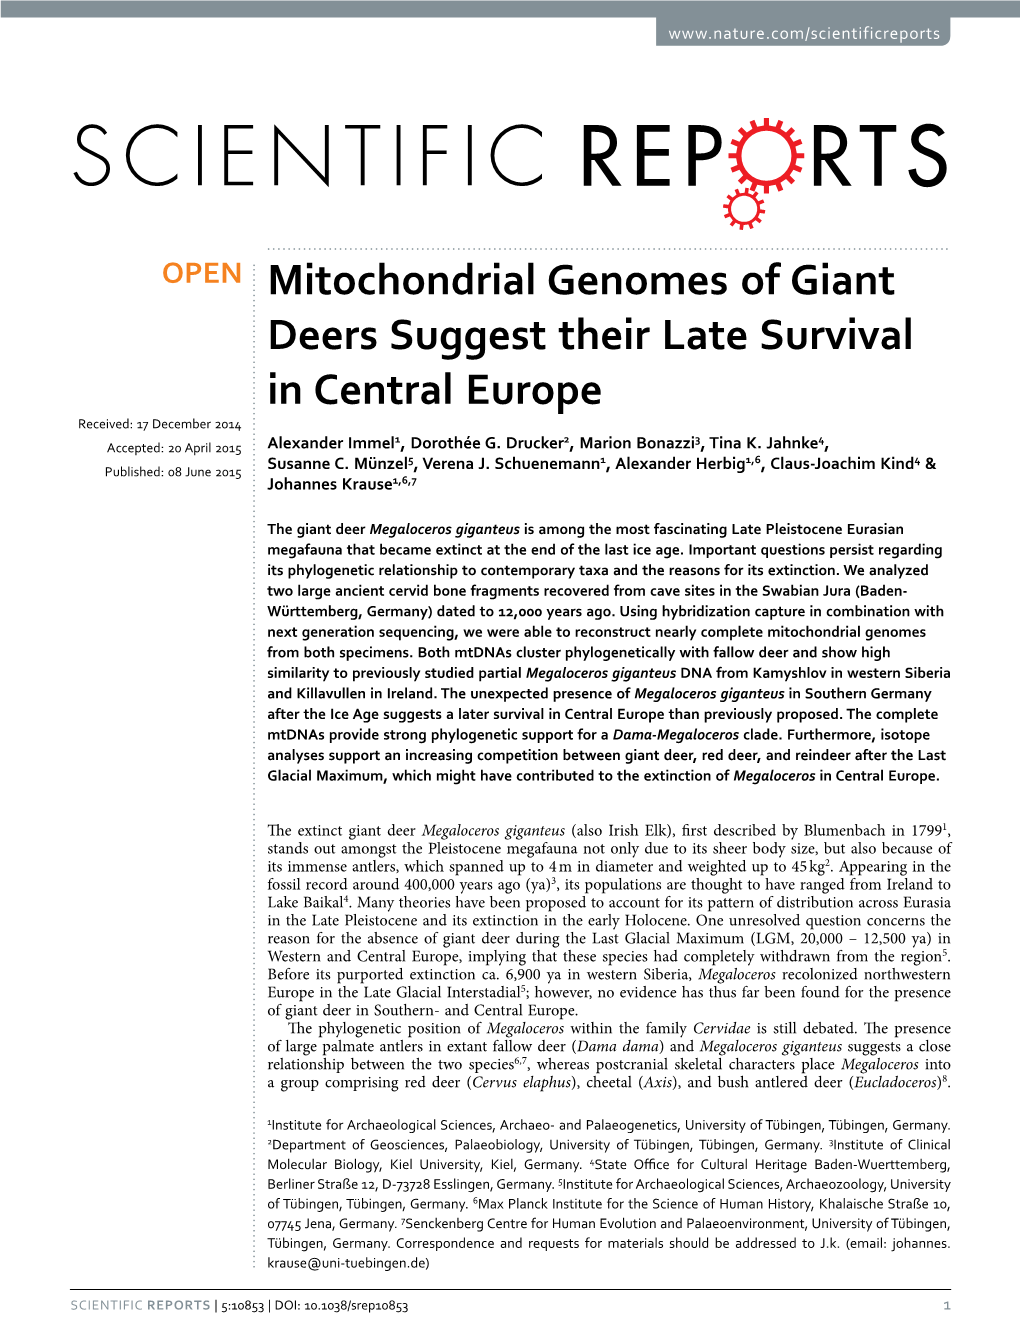 Mitochondrial Genomes of Giant Deers Suggest Their